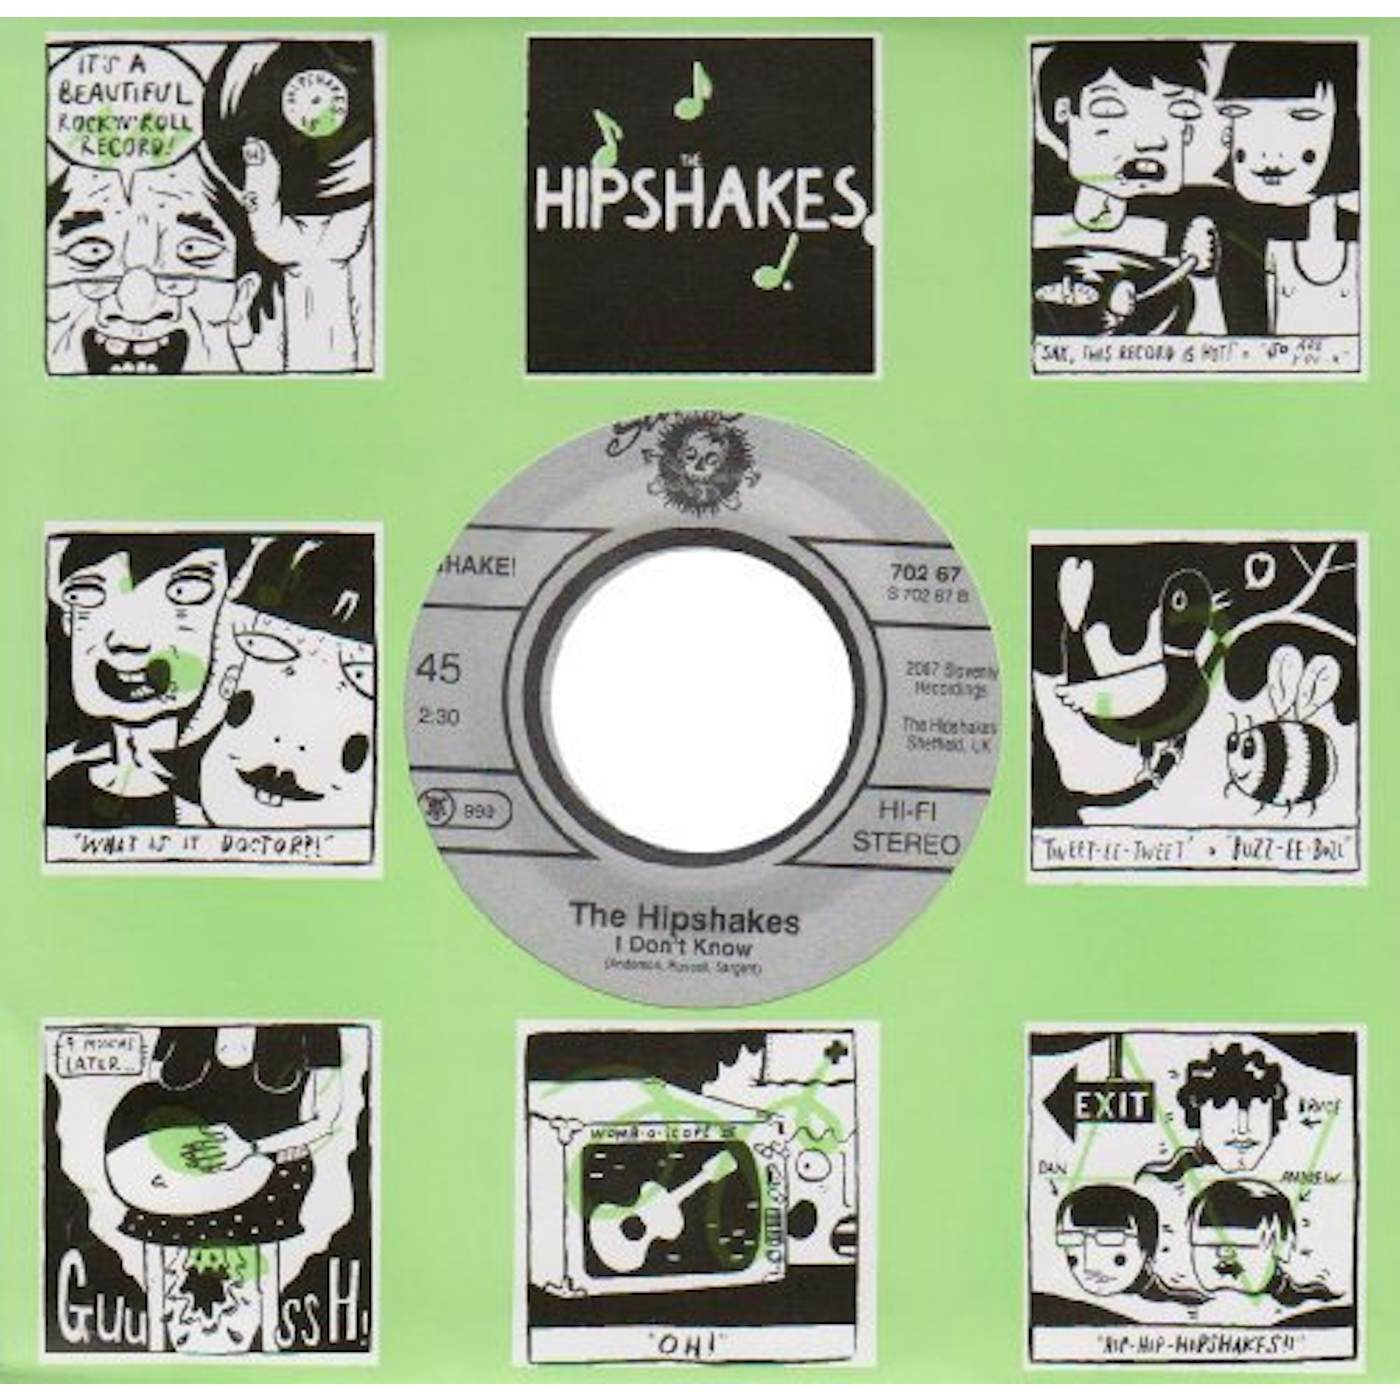 The Hipshakes I DON'T KNOW B/W WANT YOU AROUND Vinyl Record